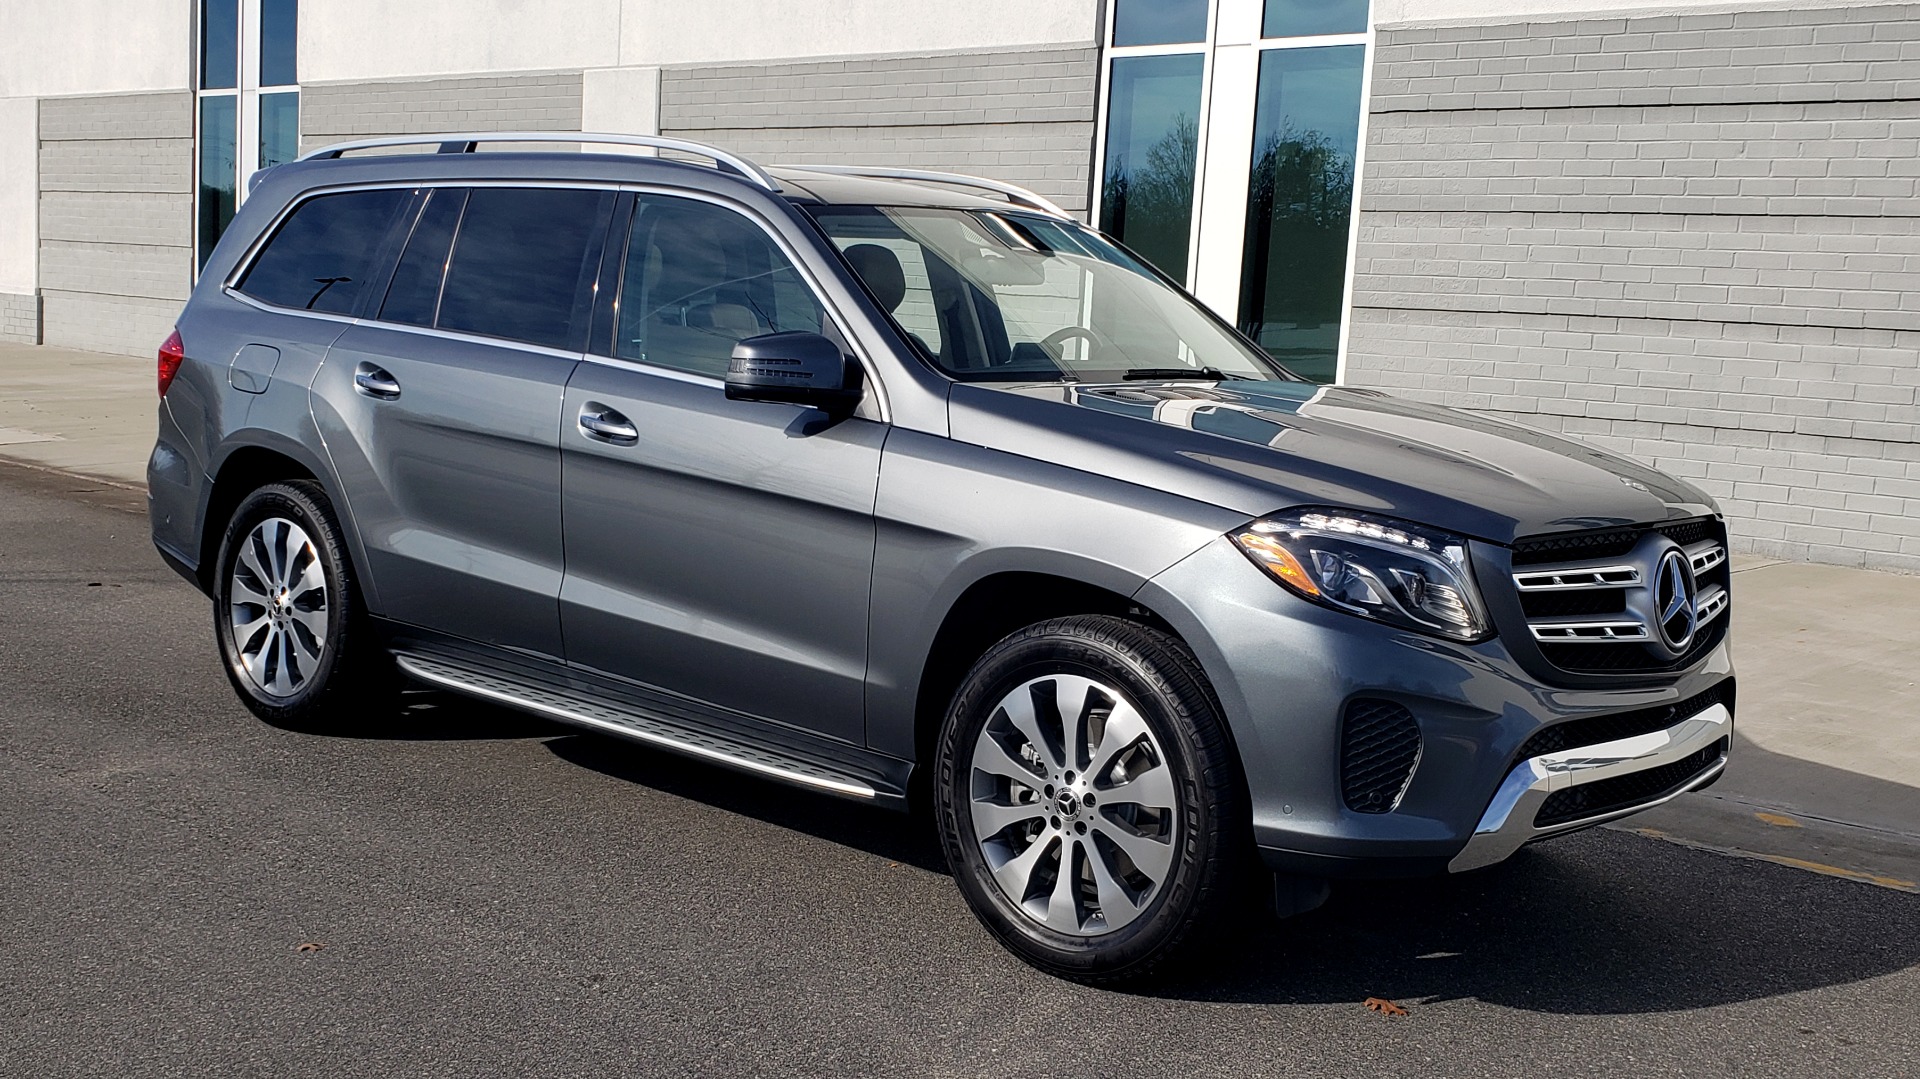 Used 2018 Mercedes-Benz GLS 450 4MATIC PREMIUM / PARK ASST / NAV / PANO-ROOF / 3-ROW / REARVIEW for sale $54,395 at Formula Imports in Charlotte NC 28227 7